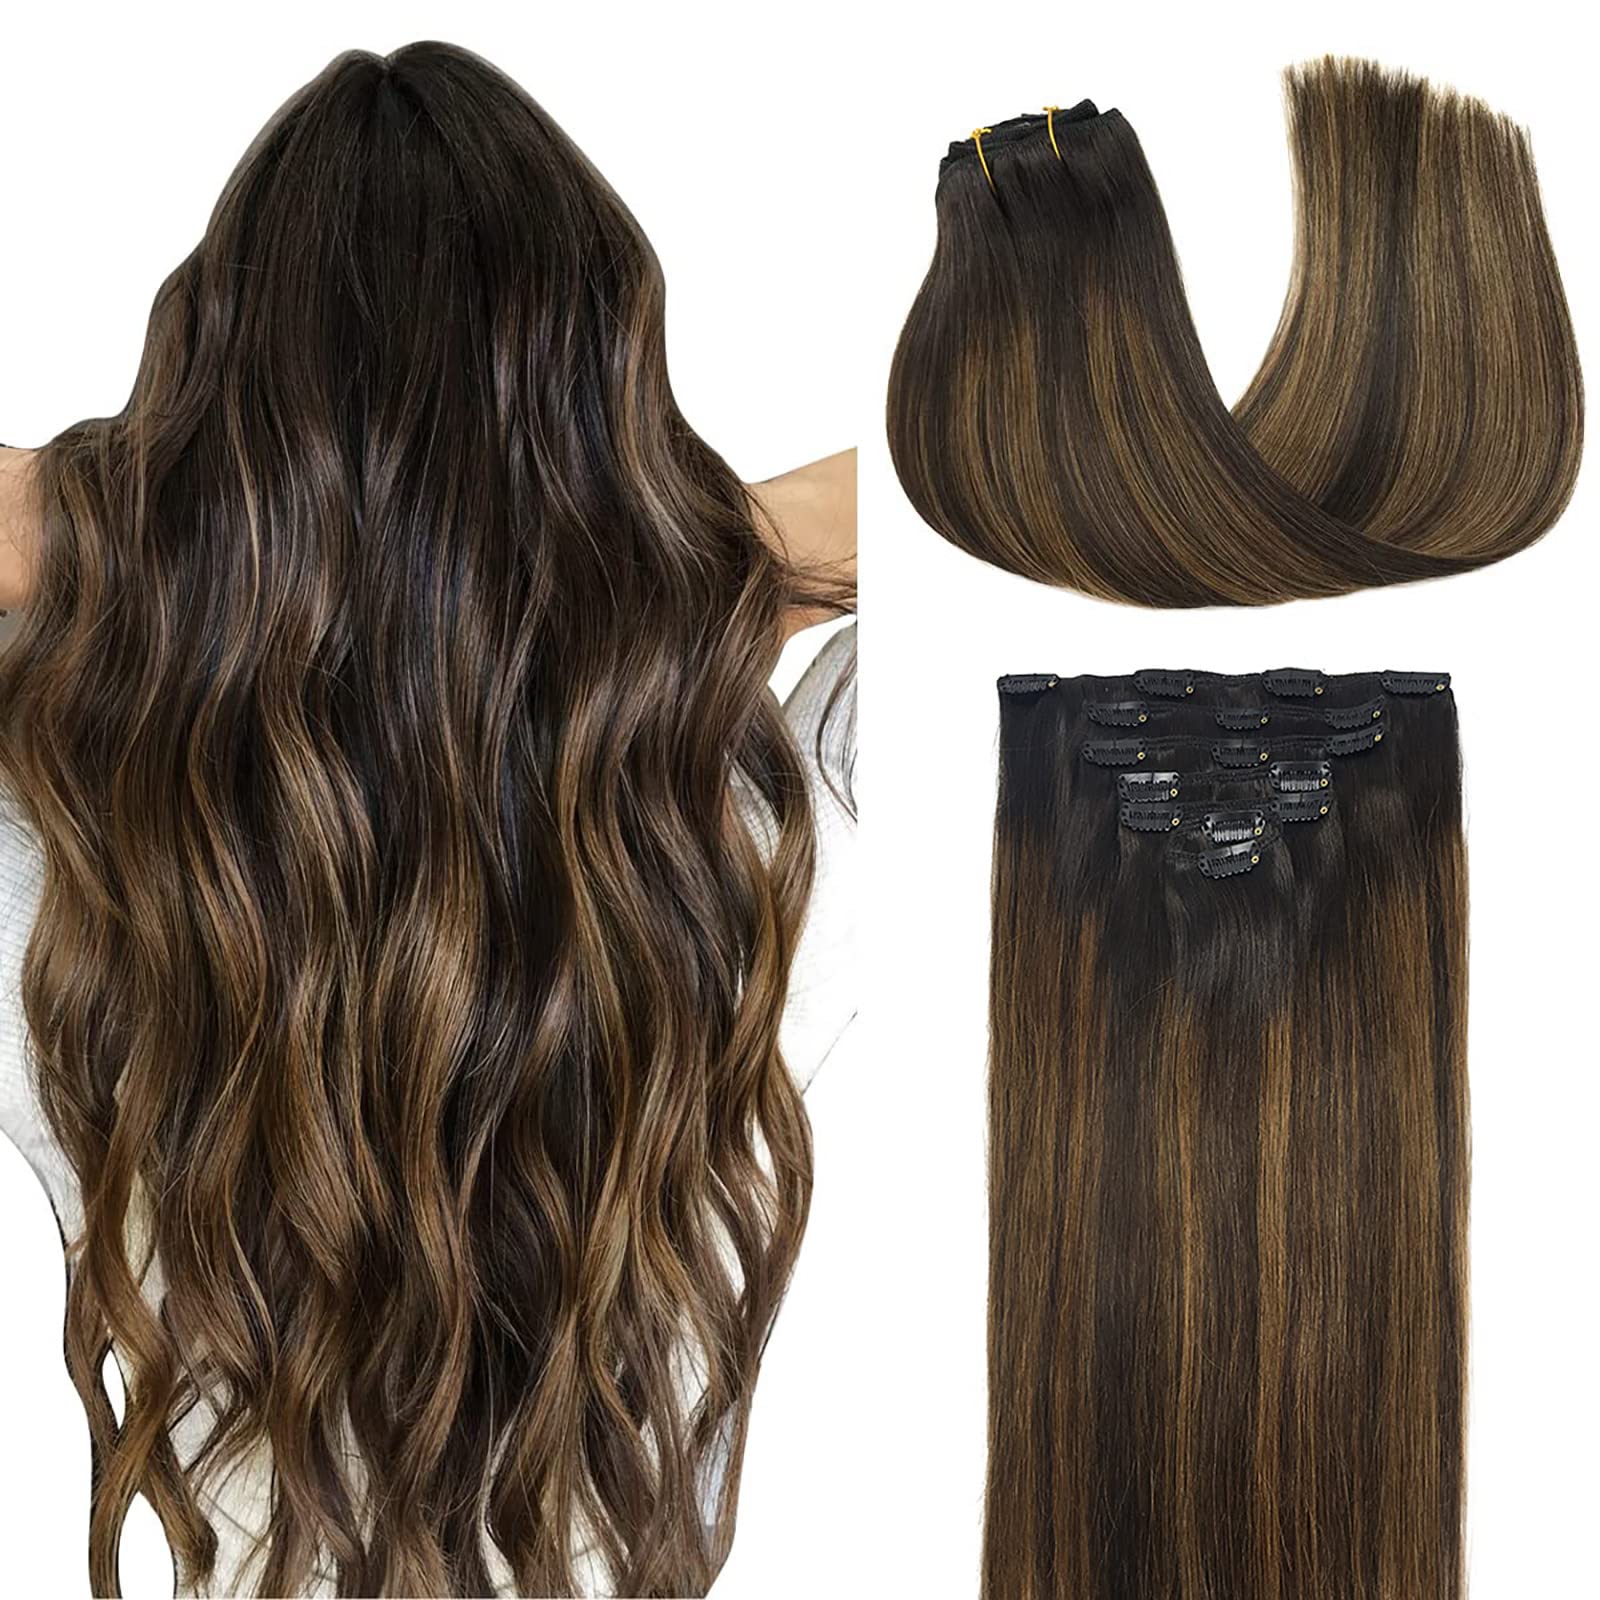 Clip in Hair Extensions Human Hair Extensions DOORES Balayage Dark Brown to  Chestnut Brown 120g 7pcs 18 Inch Real Human Hair Extensions Clip in  Straight Remy Hair Extensions 18 Inch-120g 2/6/2 Dark